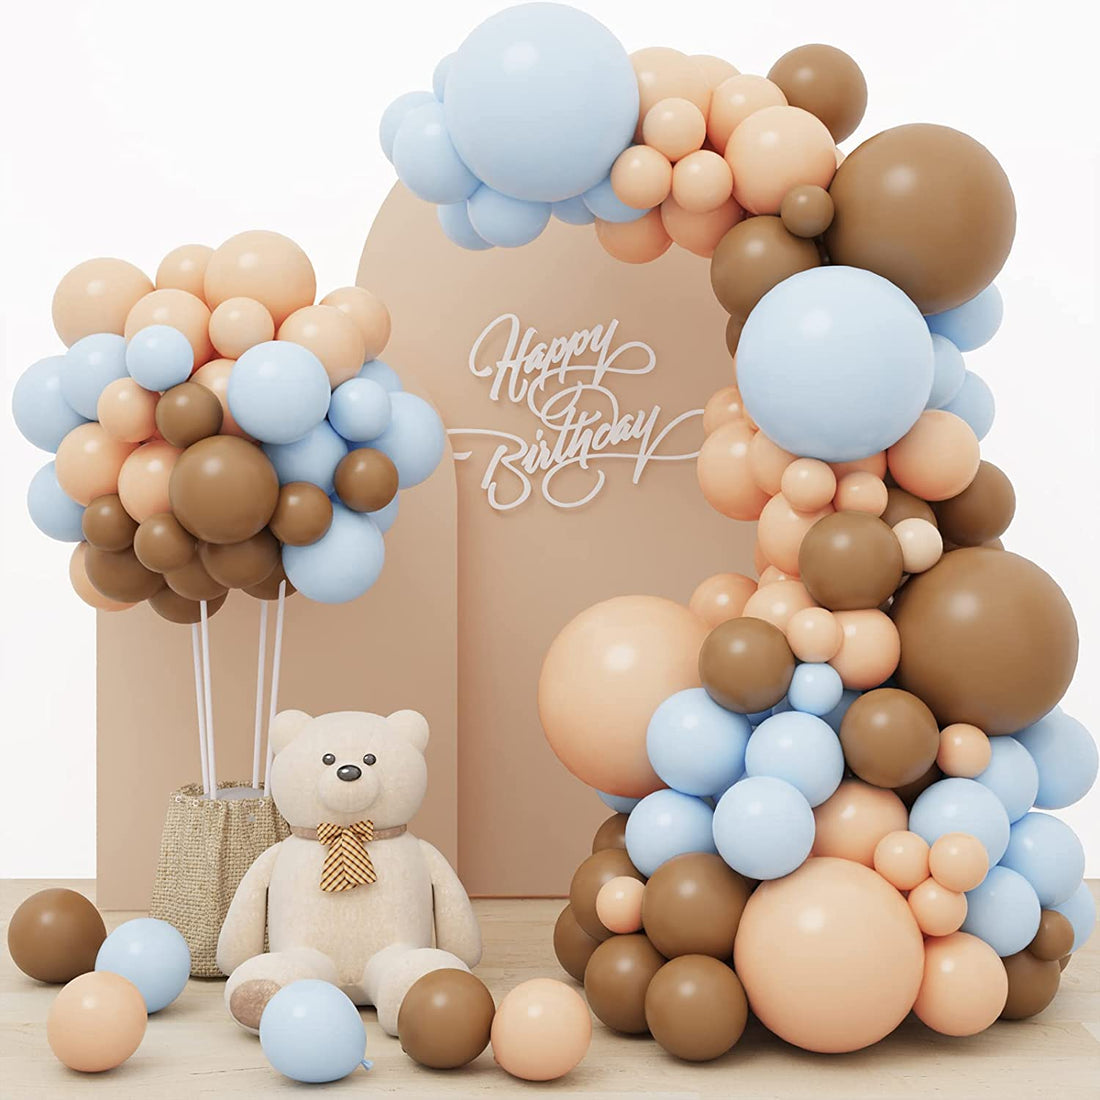 Rose morning X015 is a set of 156 pieces brown blue balloons for party decorations for any occasion. This set of balloons contains balloons of various sizes and colors that can be used to create beautiful arches, wreaths, and other decorations. Balloons are made of high-quality materials, durable to use. This set of balloons is perfect for birthdays, wedding anniversaries, Valentine&